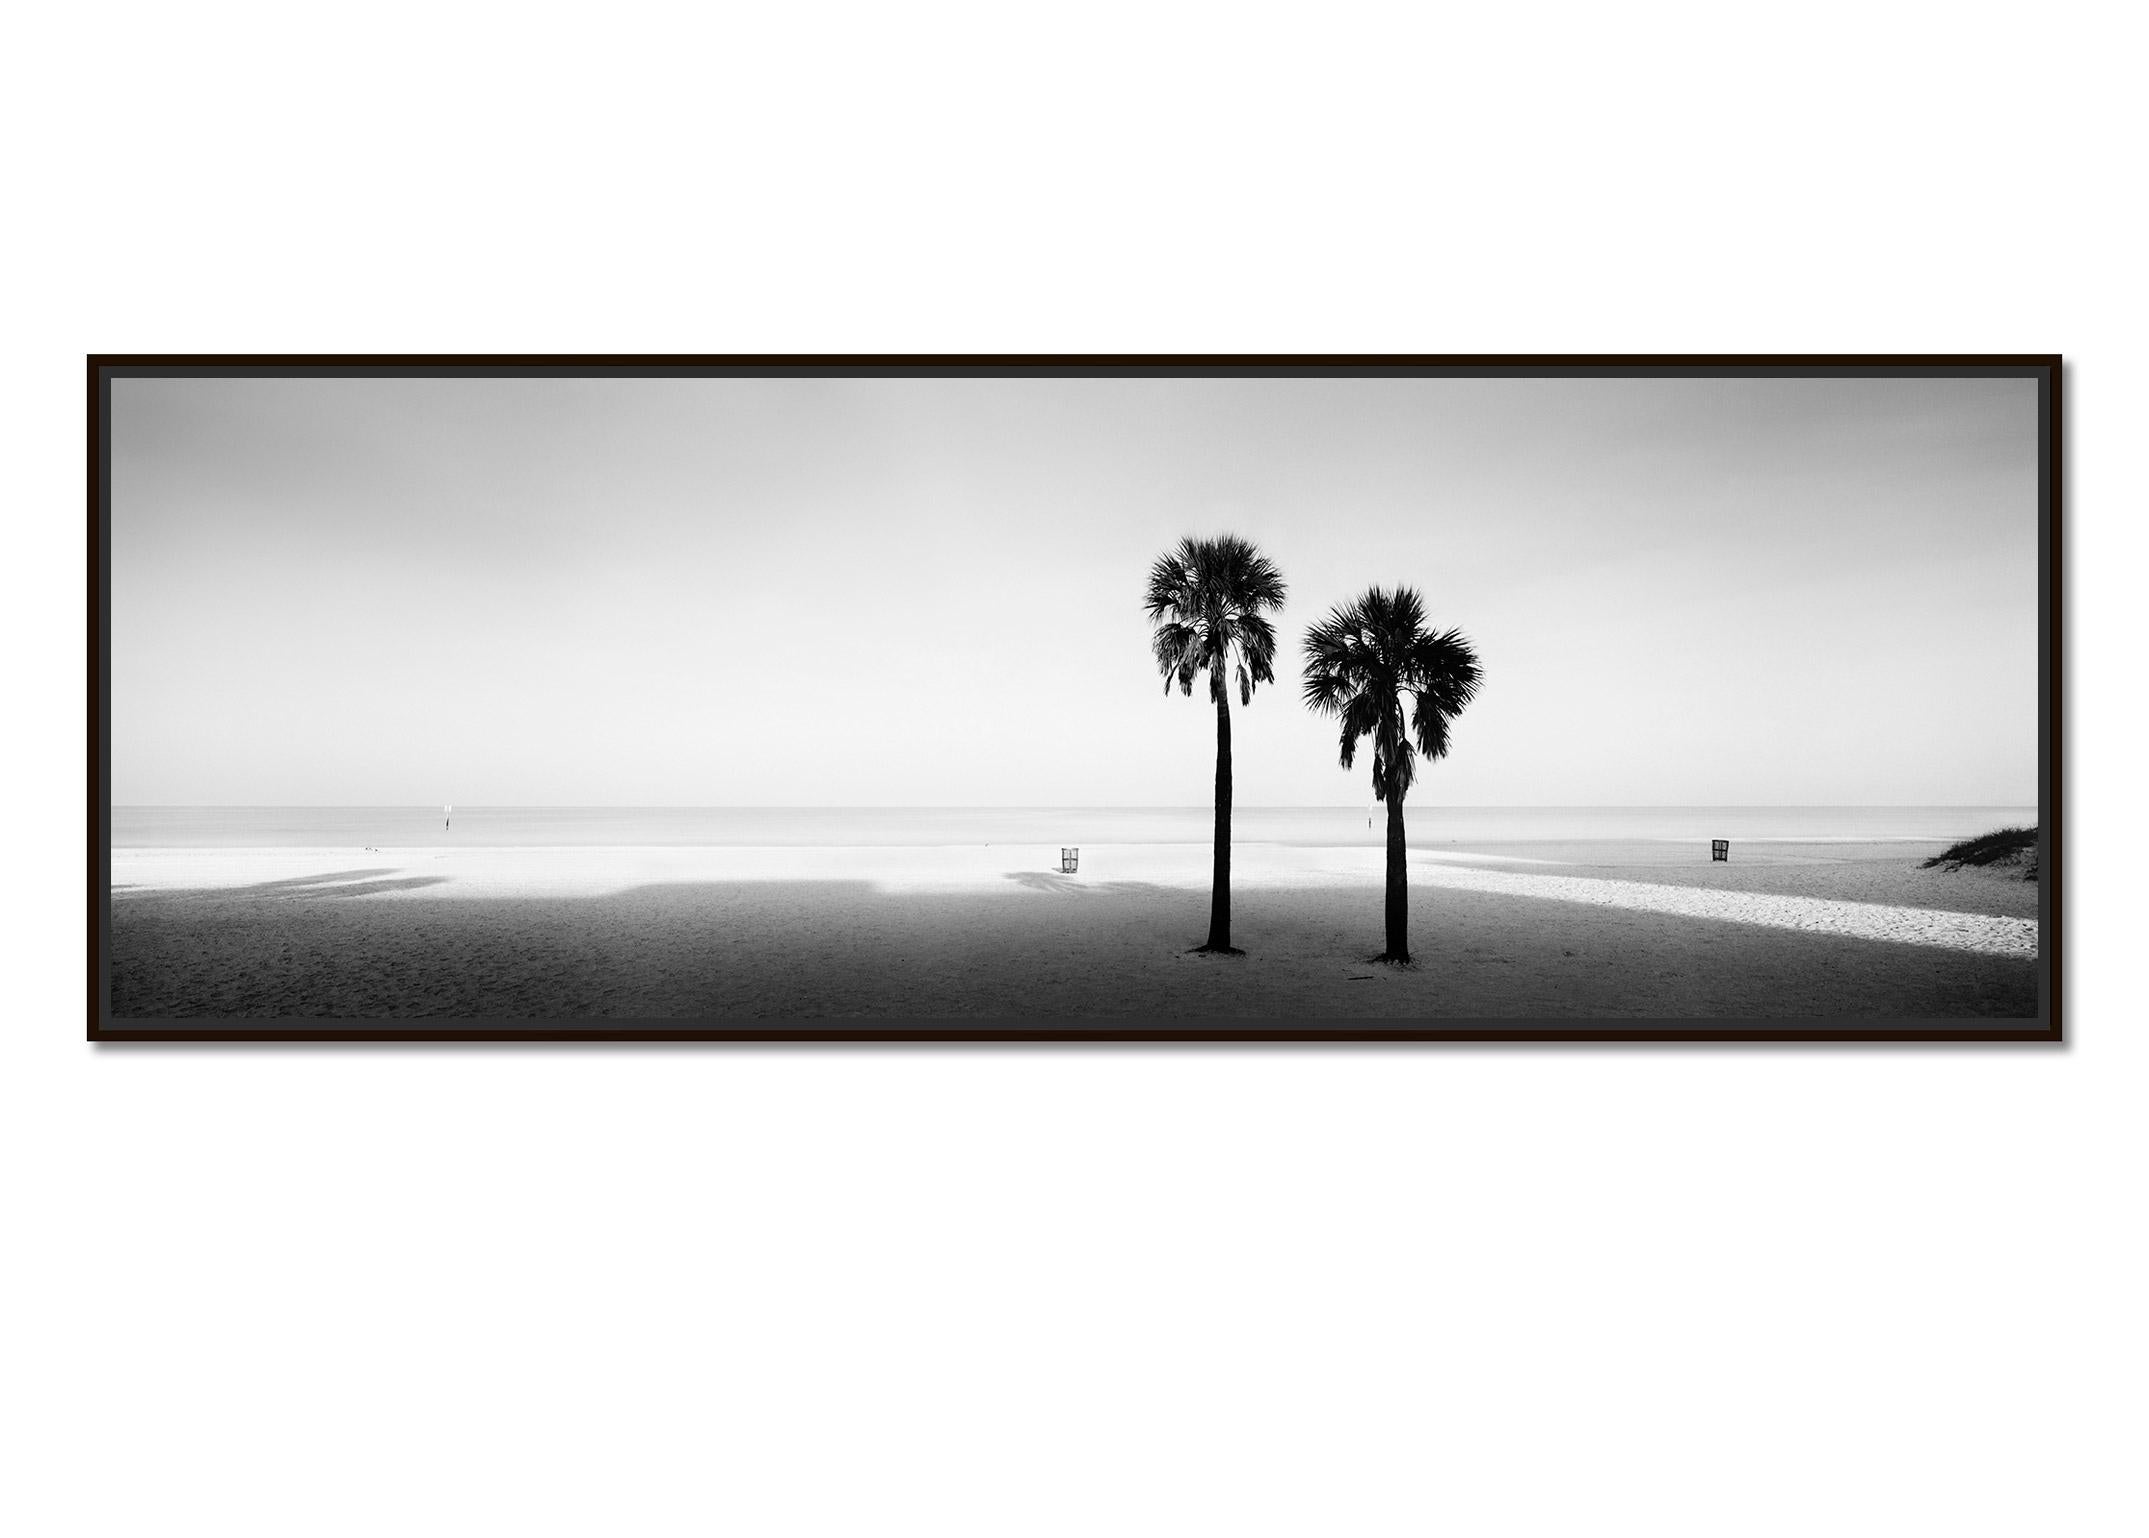 Two Palms Beach Florida USA black and white panorama landscape art photography   - Photograph by Gerald Berghammer